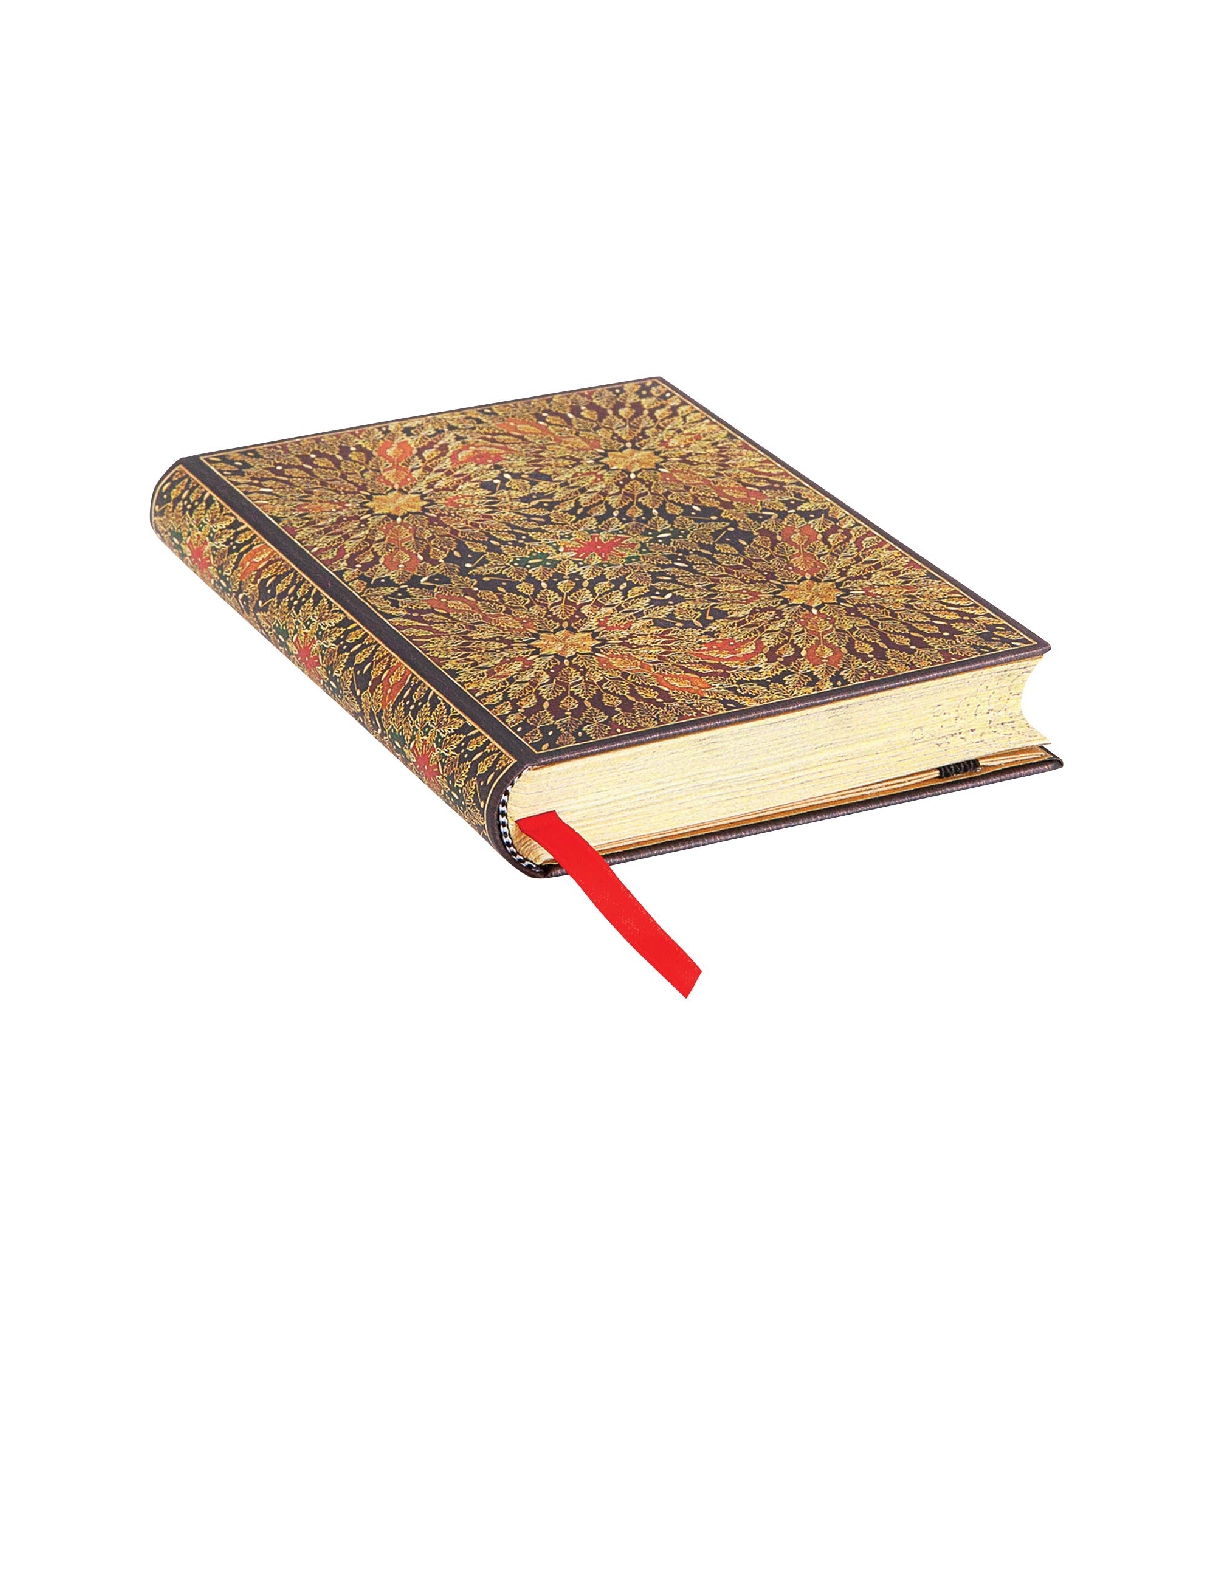 Fire Flowers, Hardcover, Mini, Unlined, Elastic Band Closure, 240 Pg, 120 GSM